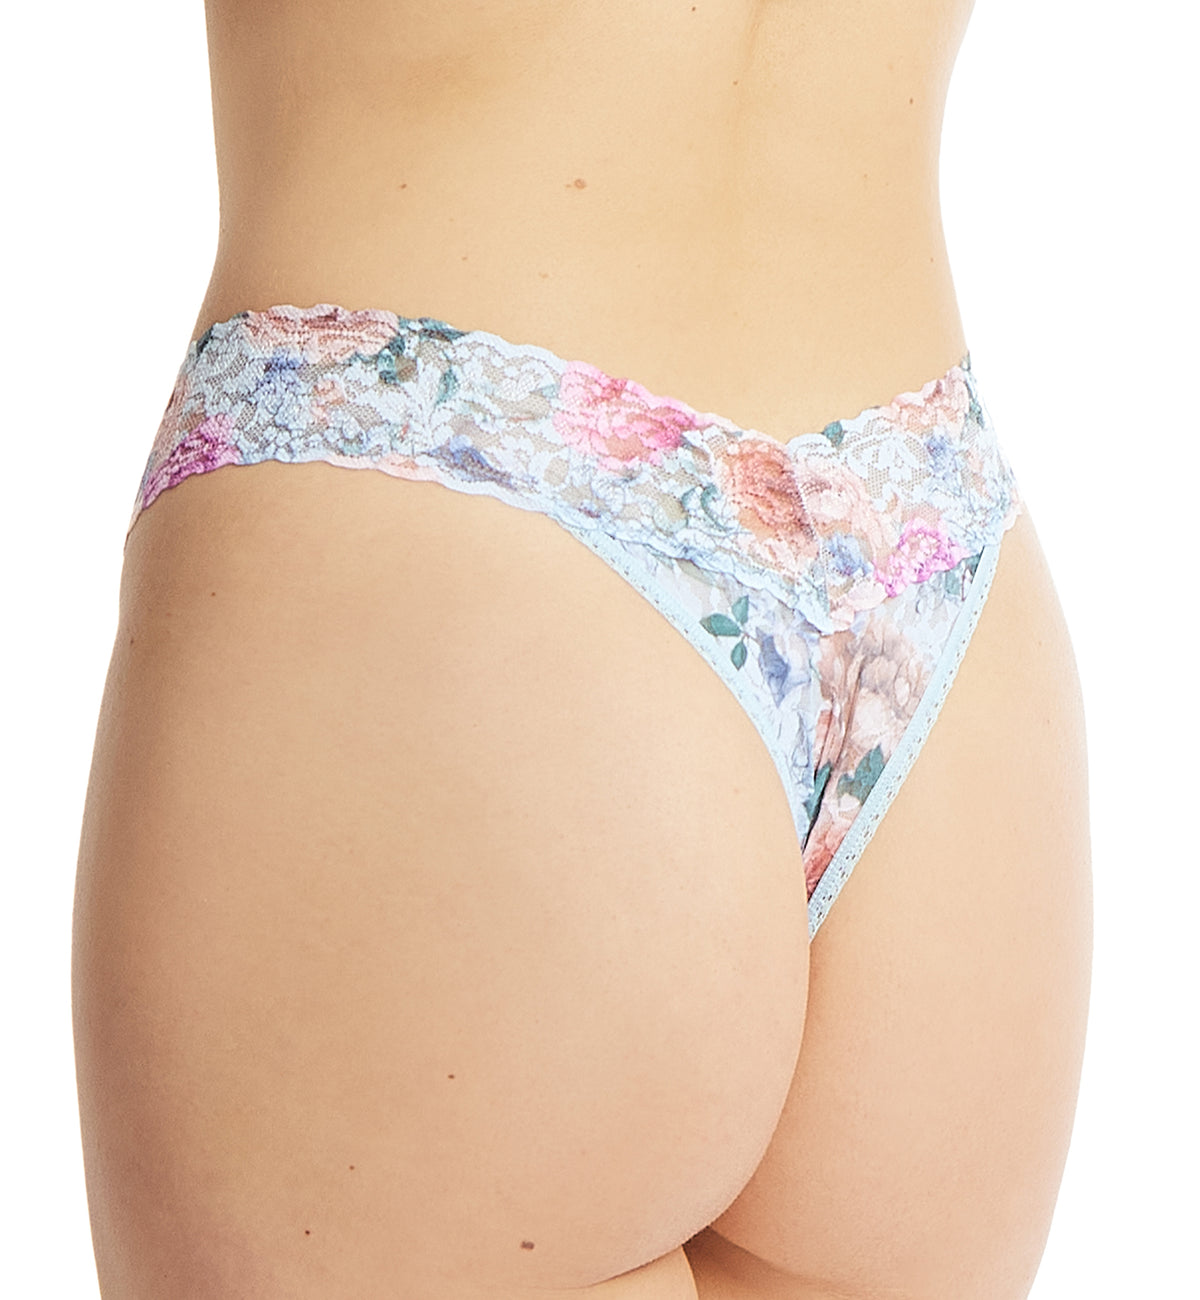 Hanky Panky Signature Lace Printed Original Rise Thong (PR4811P),Tea for Two - Tea for Two,One Size